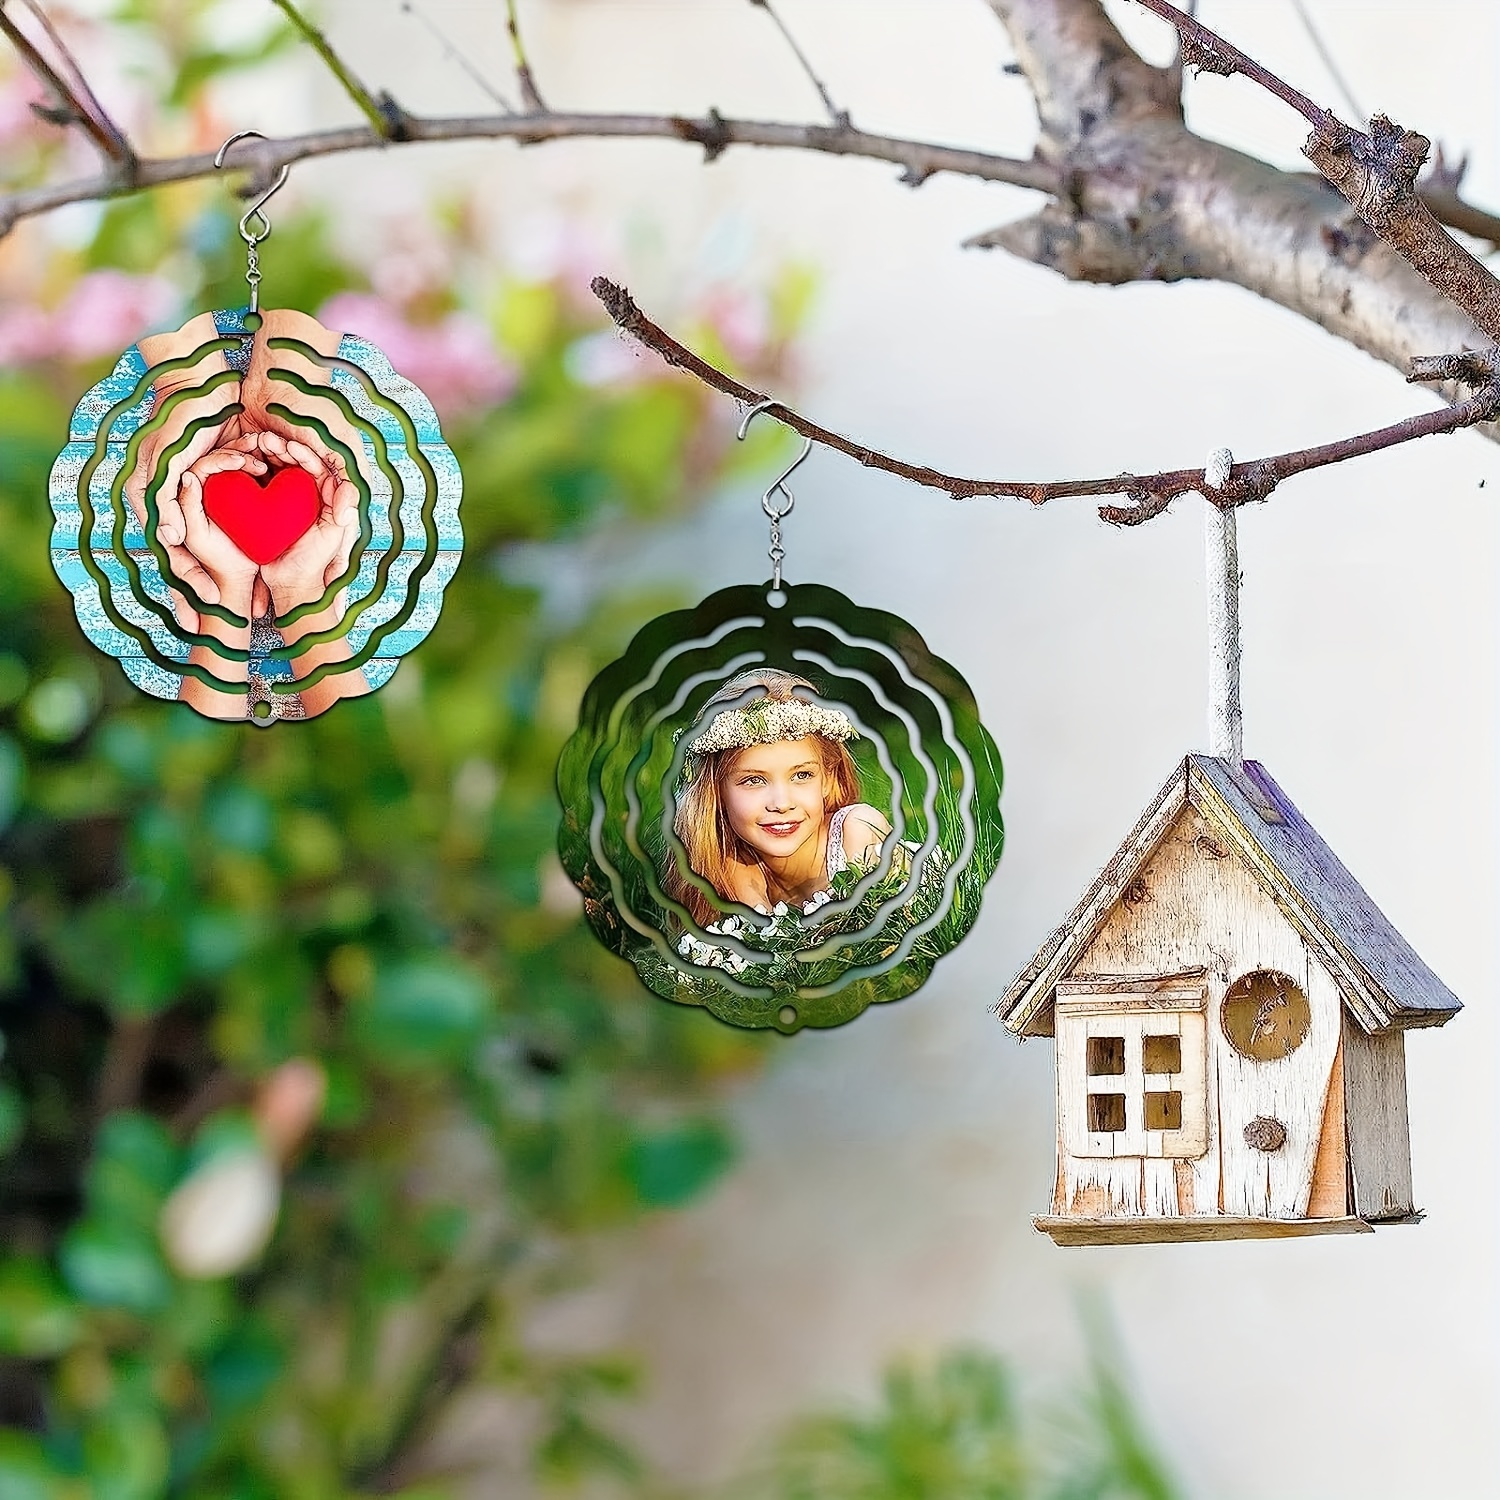 4PCS Sublimation Wind Spinner Blanks Hanging Ornaments Wind Powered  Sculpture For Yards Gardens Decoration 